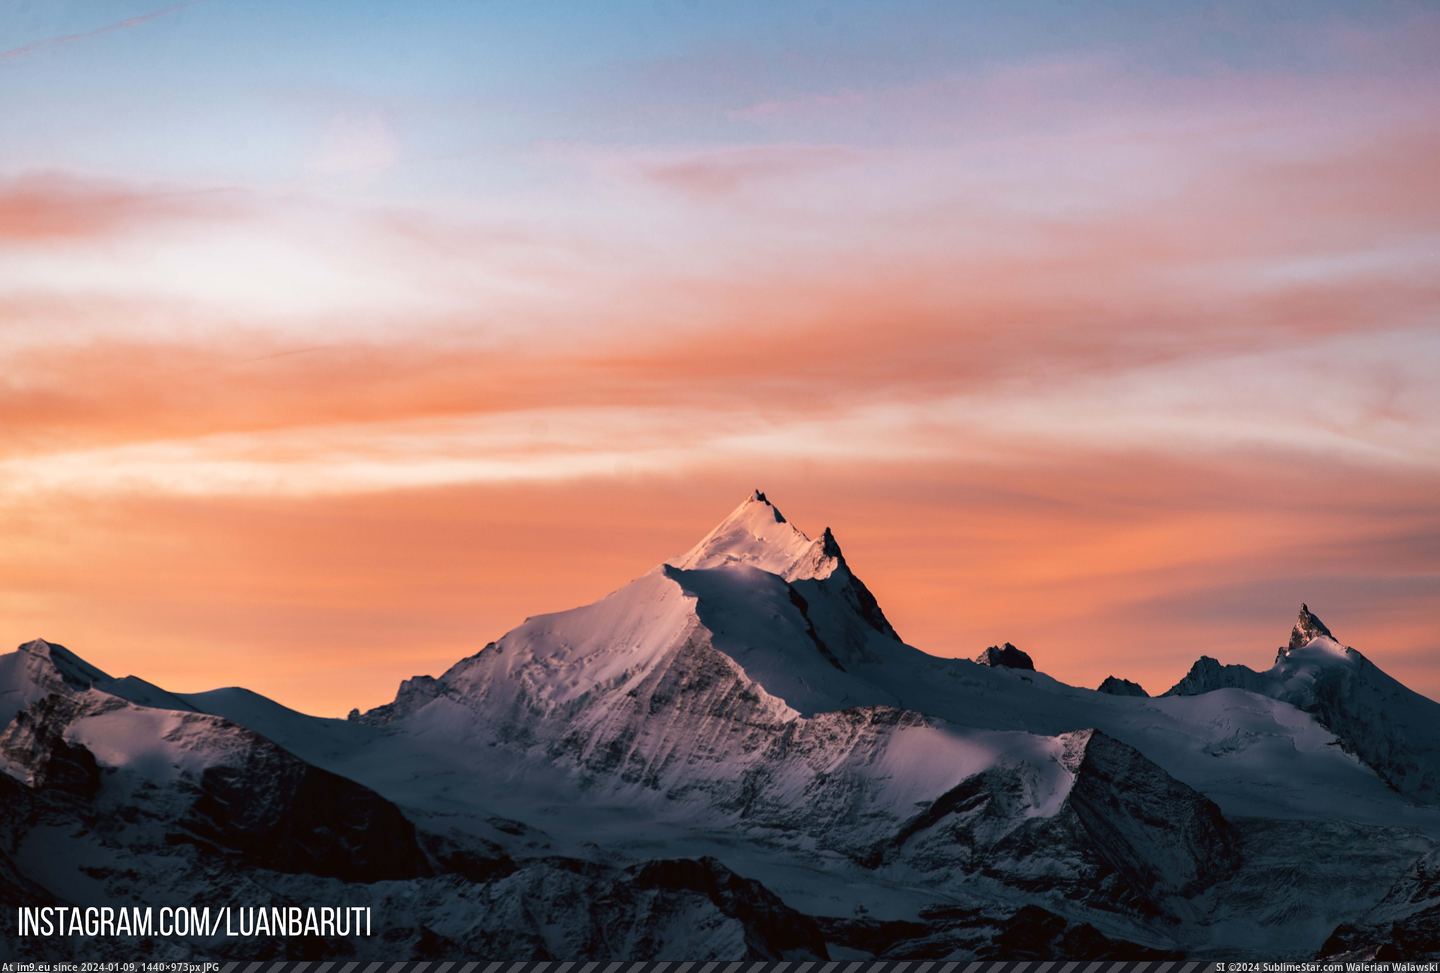 #Night #Original #Dawn #Catch #File #Spent #Mountain [Earthporn] I spent the night on 10.000ft to catch the Weisshorn mountain at dawn. [original file in comments] [6016x4016] Pic. (Bild von album My r/EARTHPORN favs))